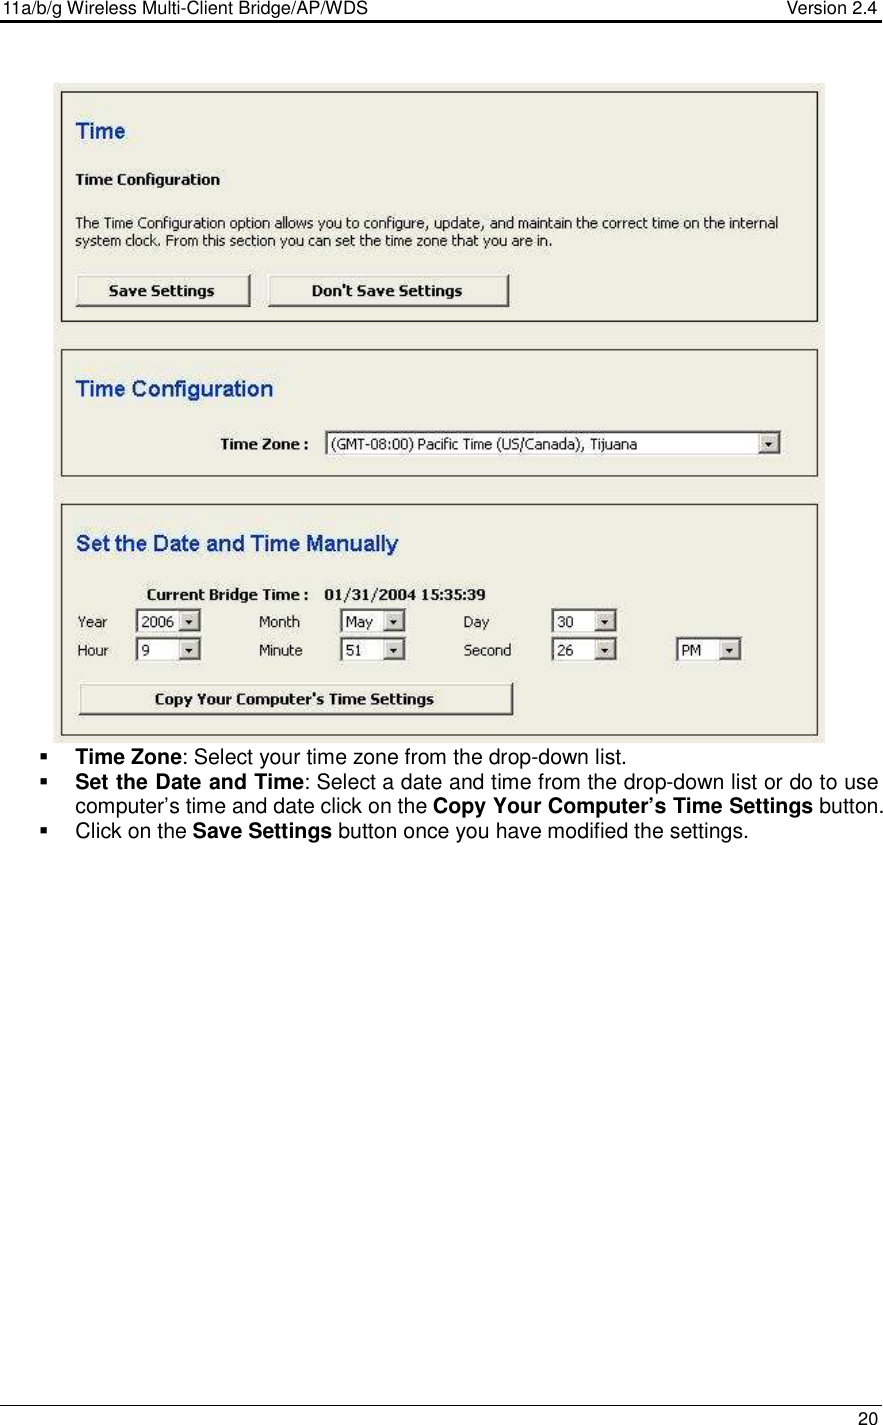 11a/b/g Wireless Multi-Client Bridge/AP/WDS                                  Version 2.4    20                              Time Zone: Select your time zone from the drop-down list.    Set the Date and Time: Select a date and time from the drop-down list or do to use computer’s time and date click on the Copy Your Computer’s Time Settings button.     Click on the Save Settings button once you have modified the settings.     